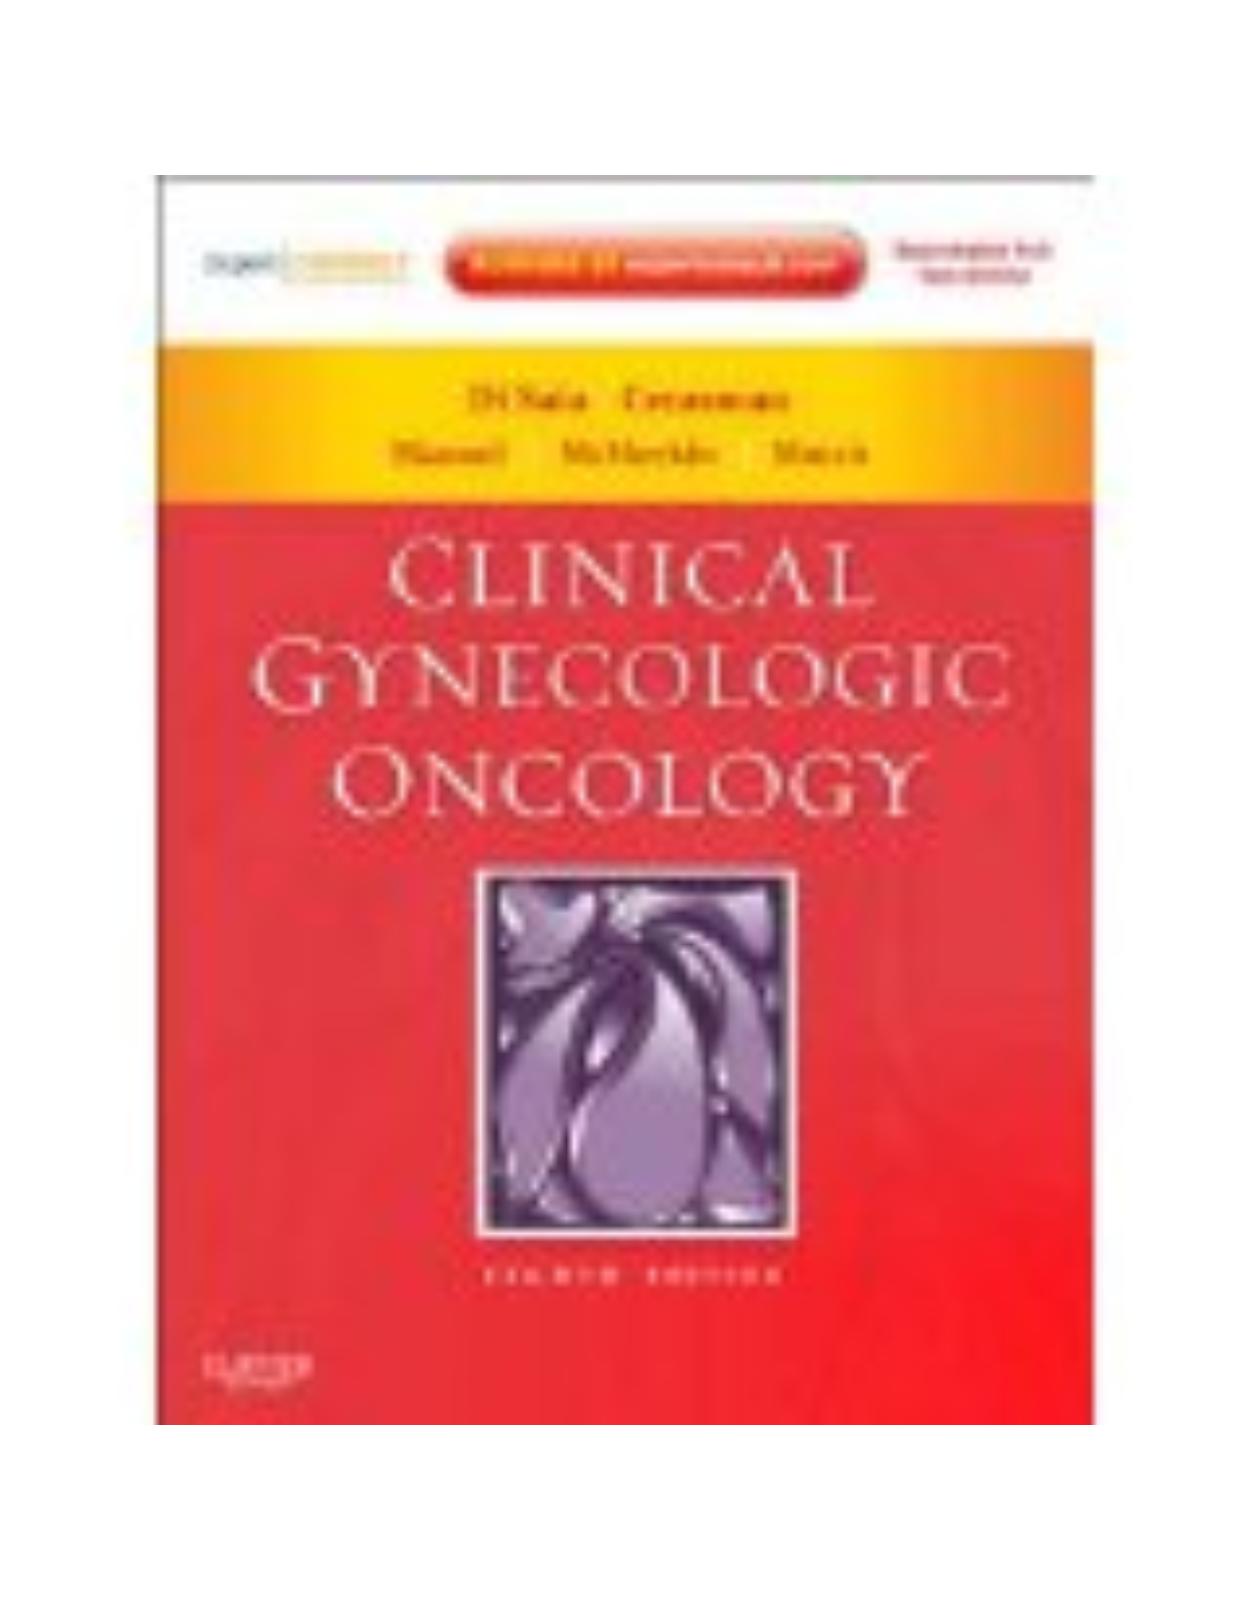 Clinical Gynecologic Oncology, 8th Edition